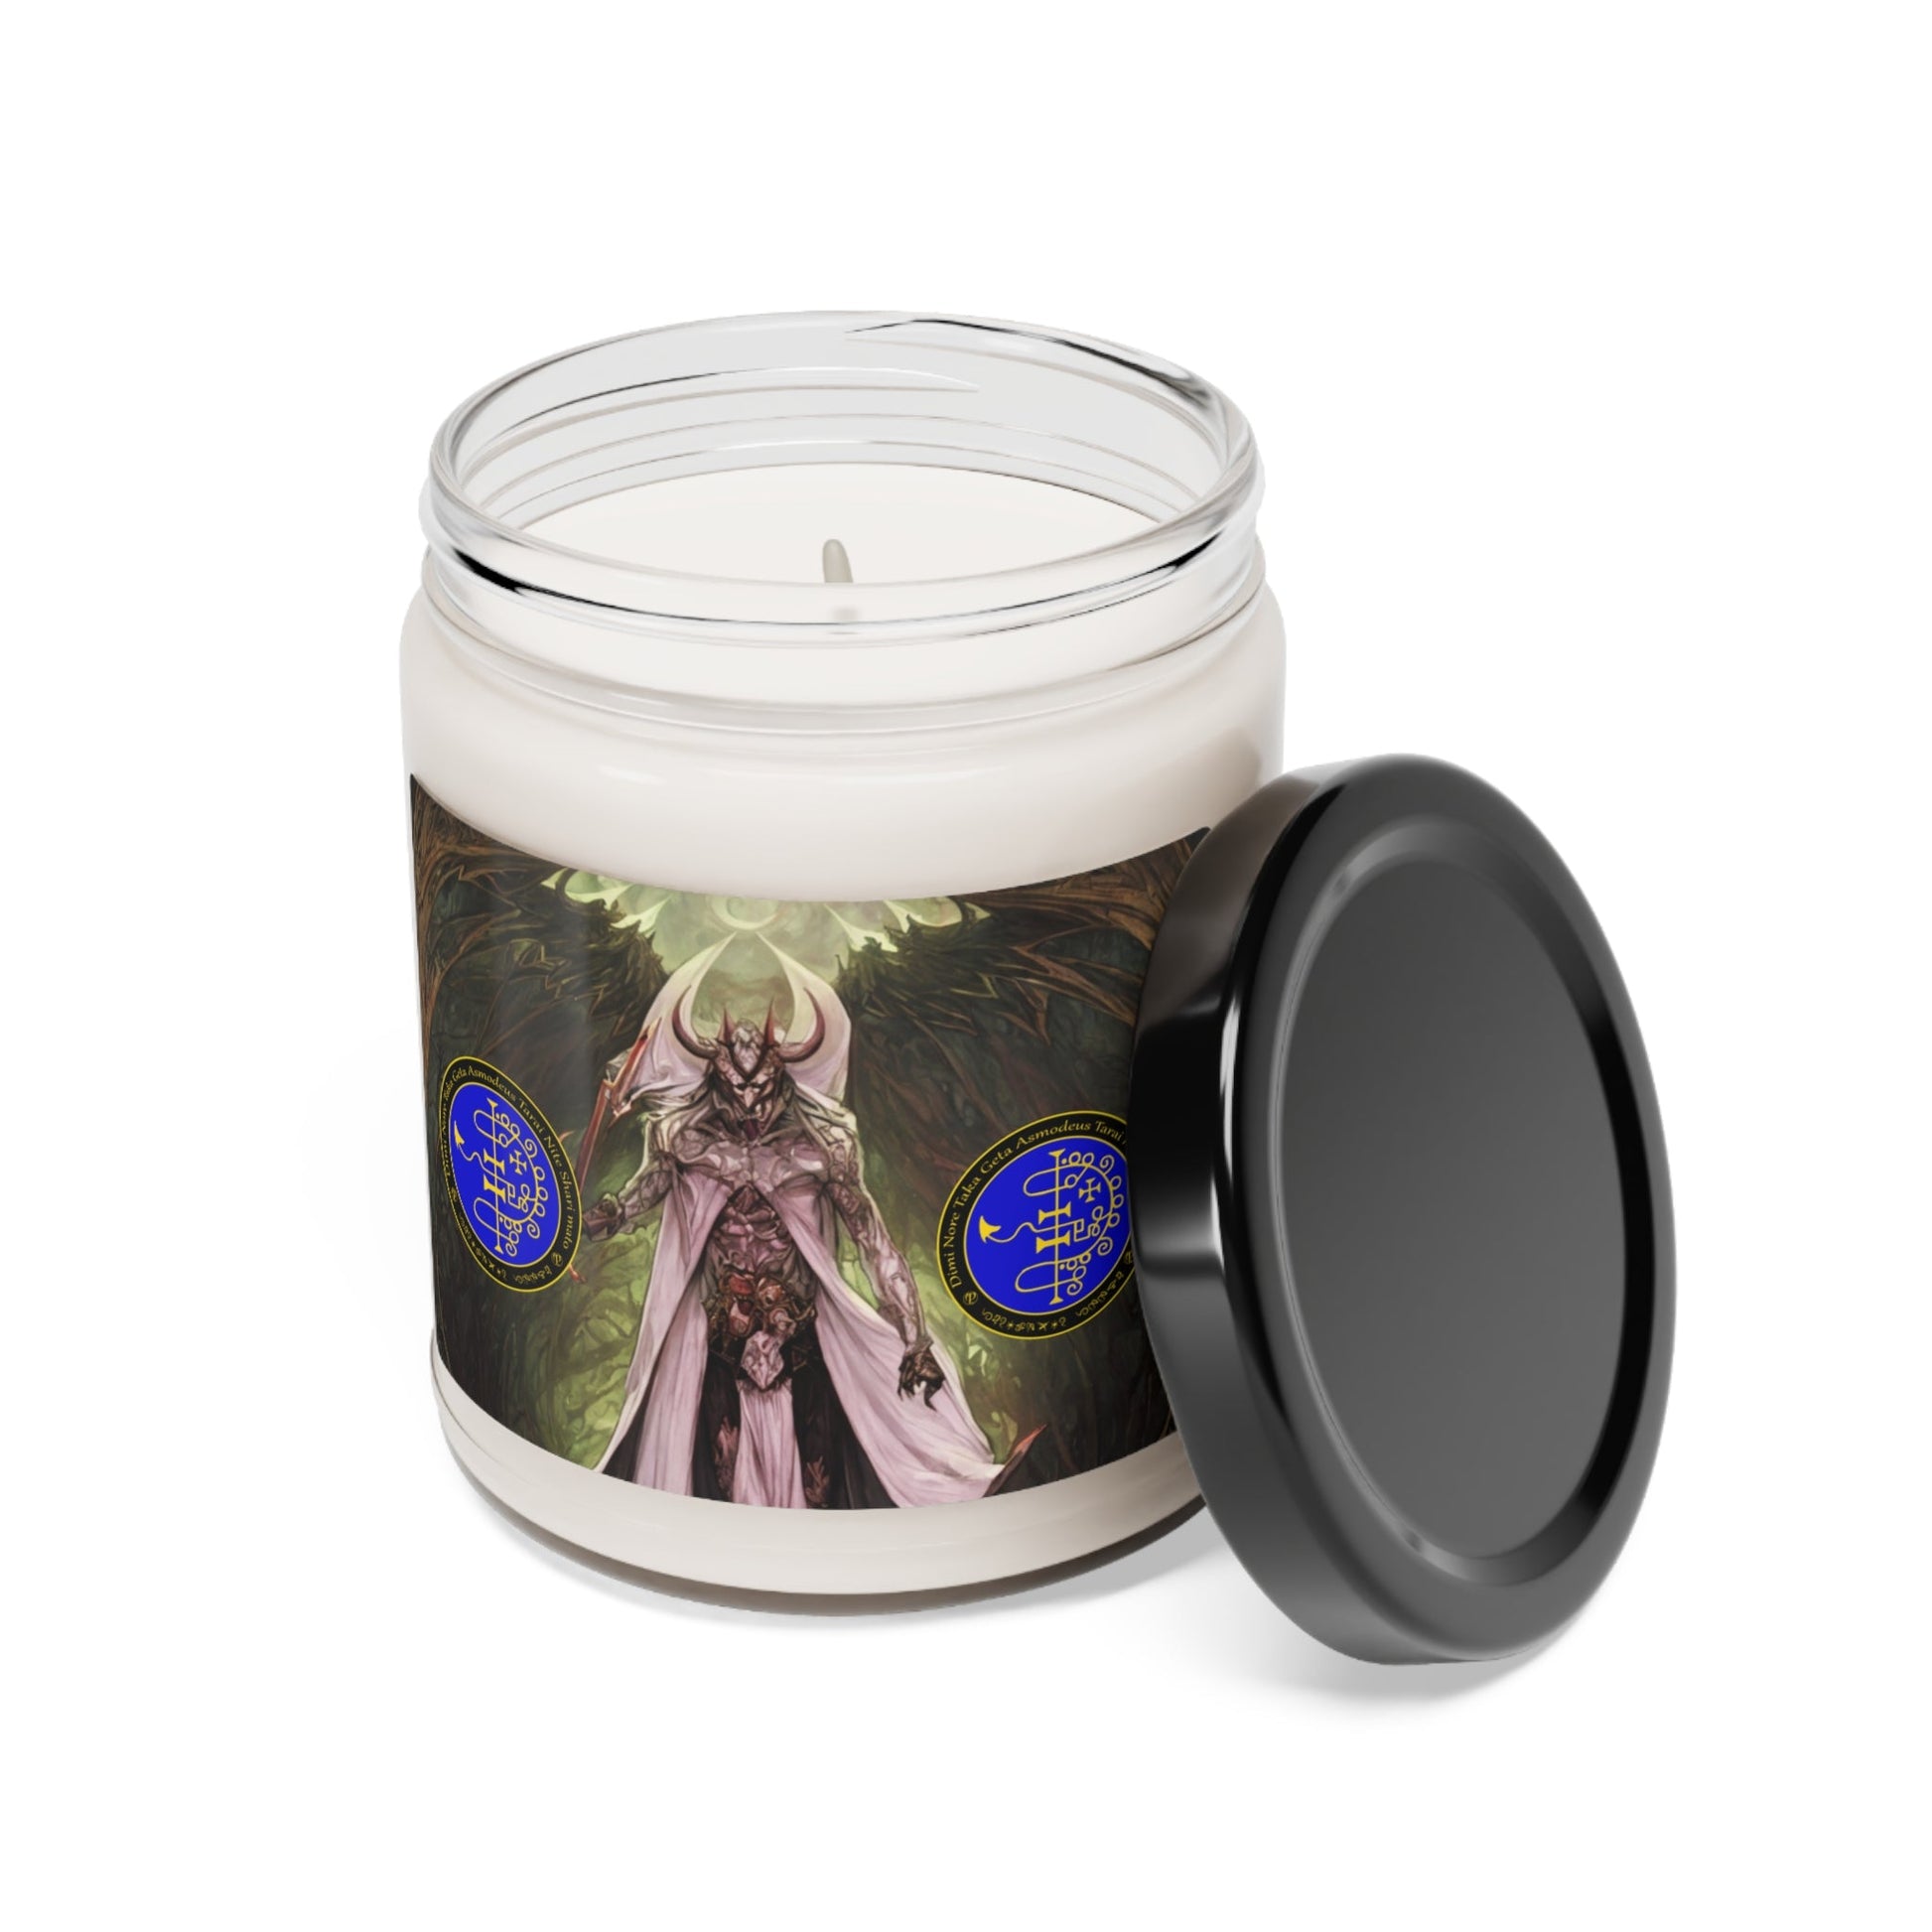 Demon-Asmodeus-Altar-Scented-Soy-Candle-for-Gambling-related-offerings-rituals-initiations-or-praying-and-meditation-22